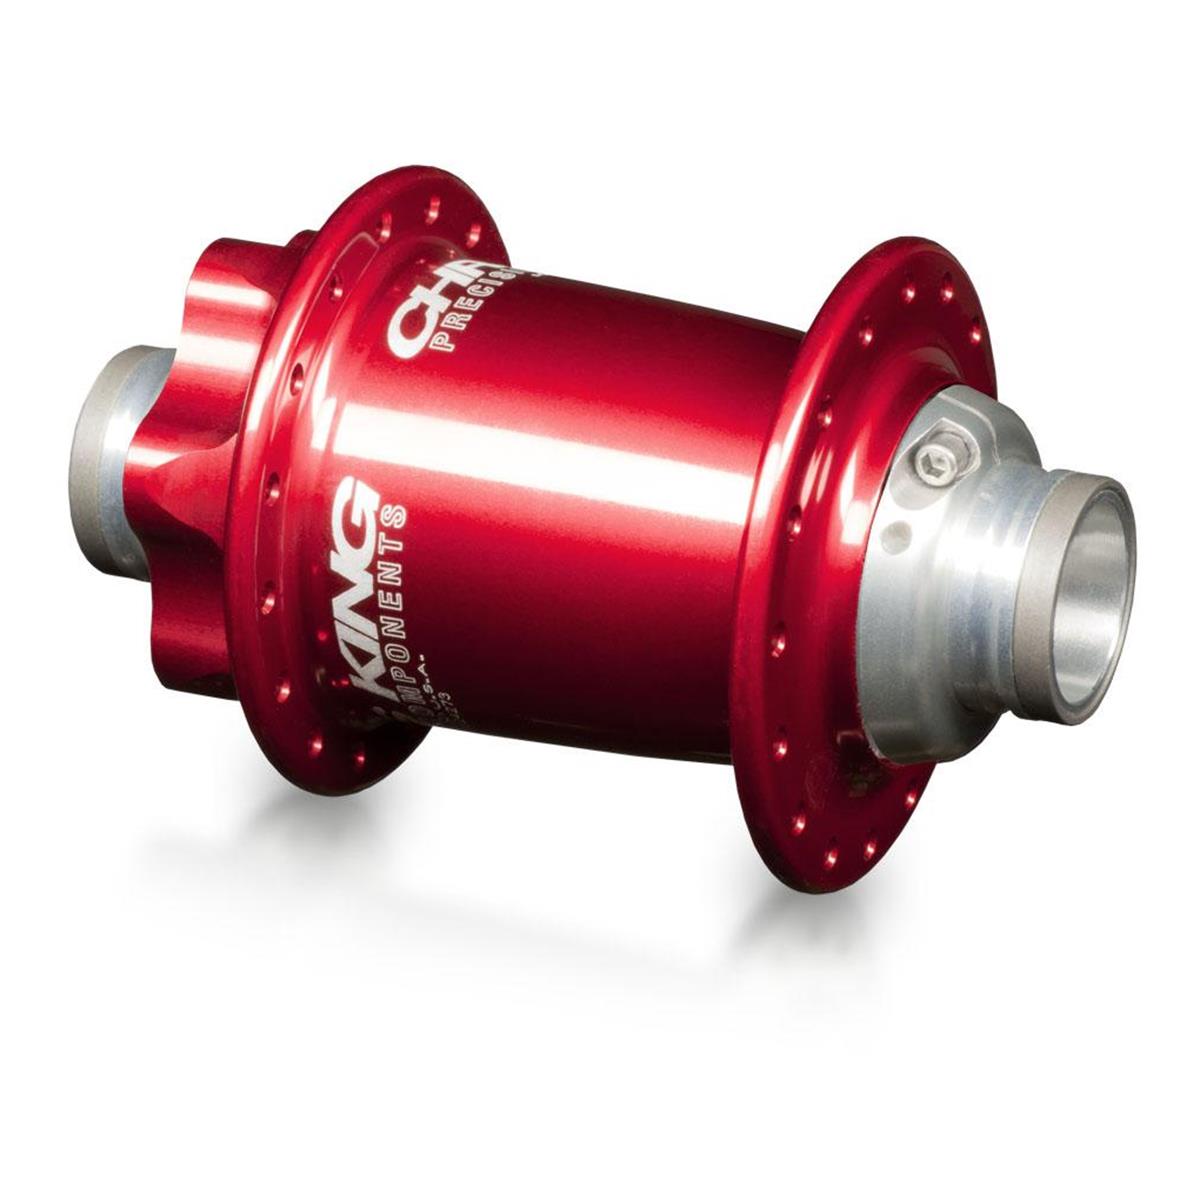 Chris King Mozzo Anteriore MTB ISO LD 110mm x 20mm, 6-Bolt, Red